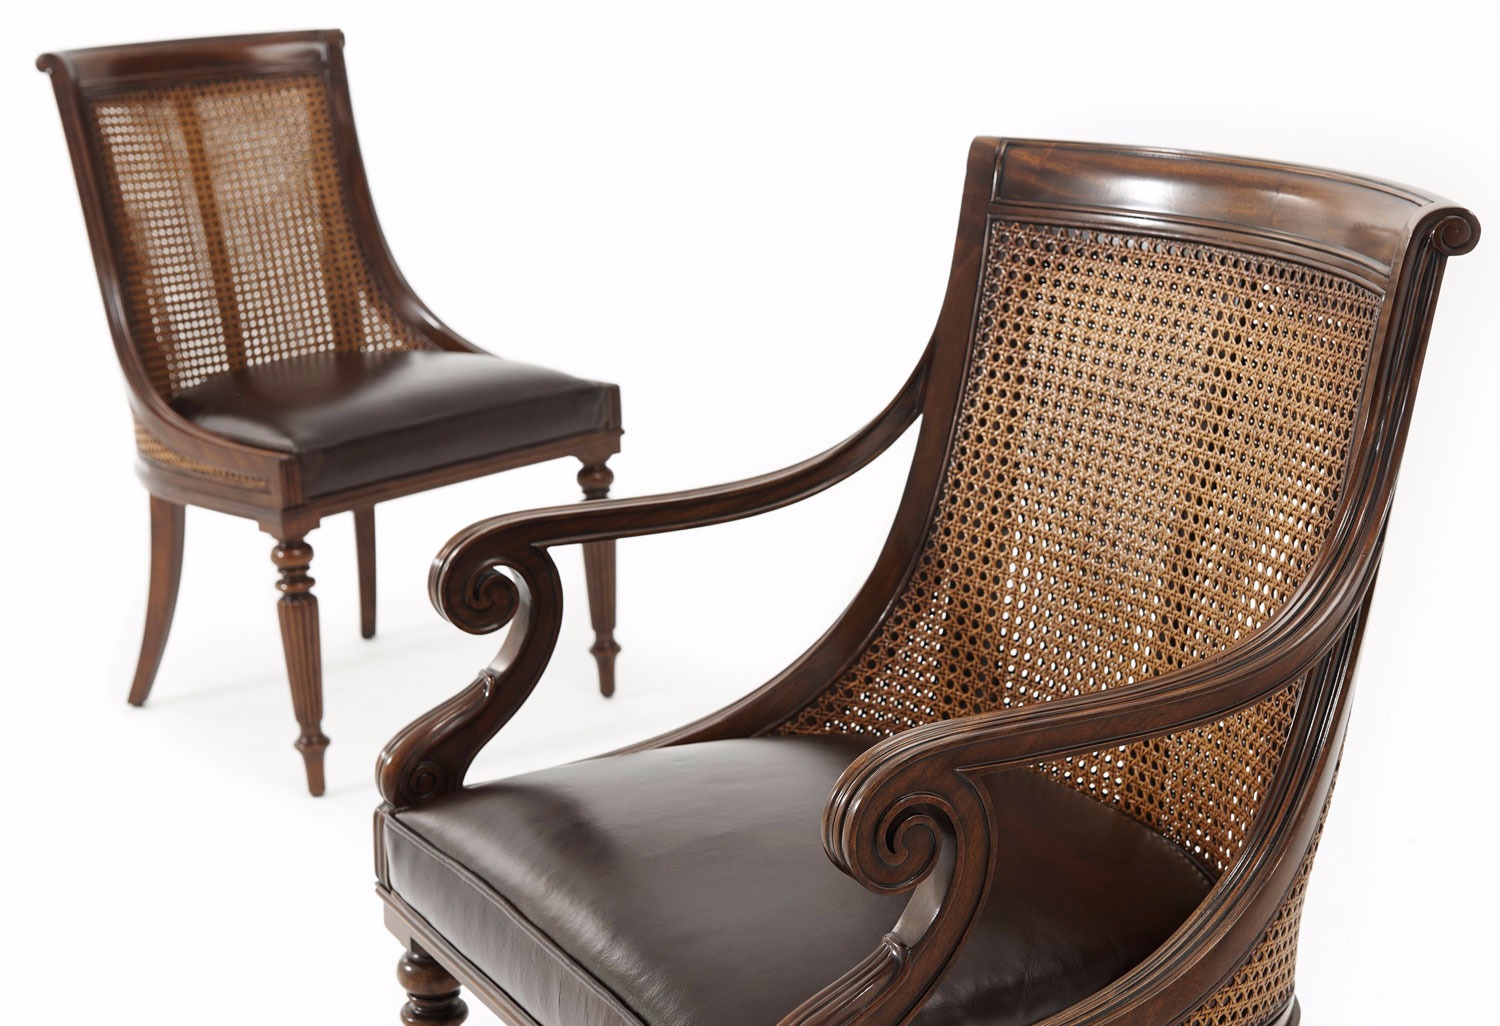 Square Carved Back Dining Room Chairs